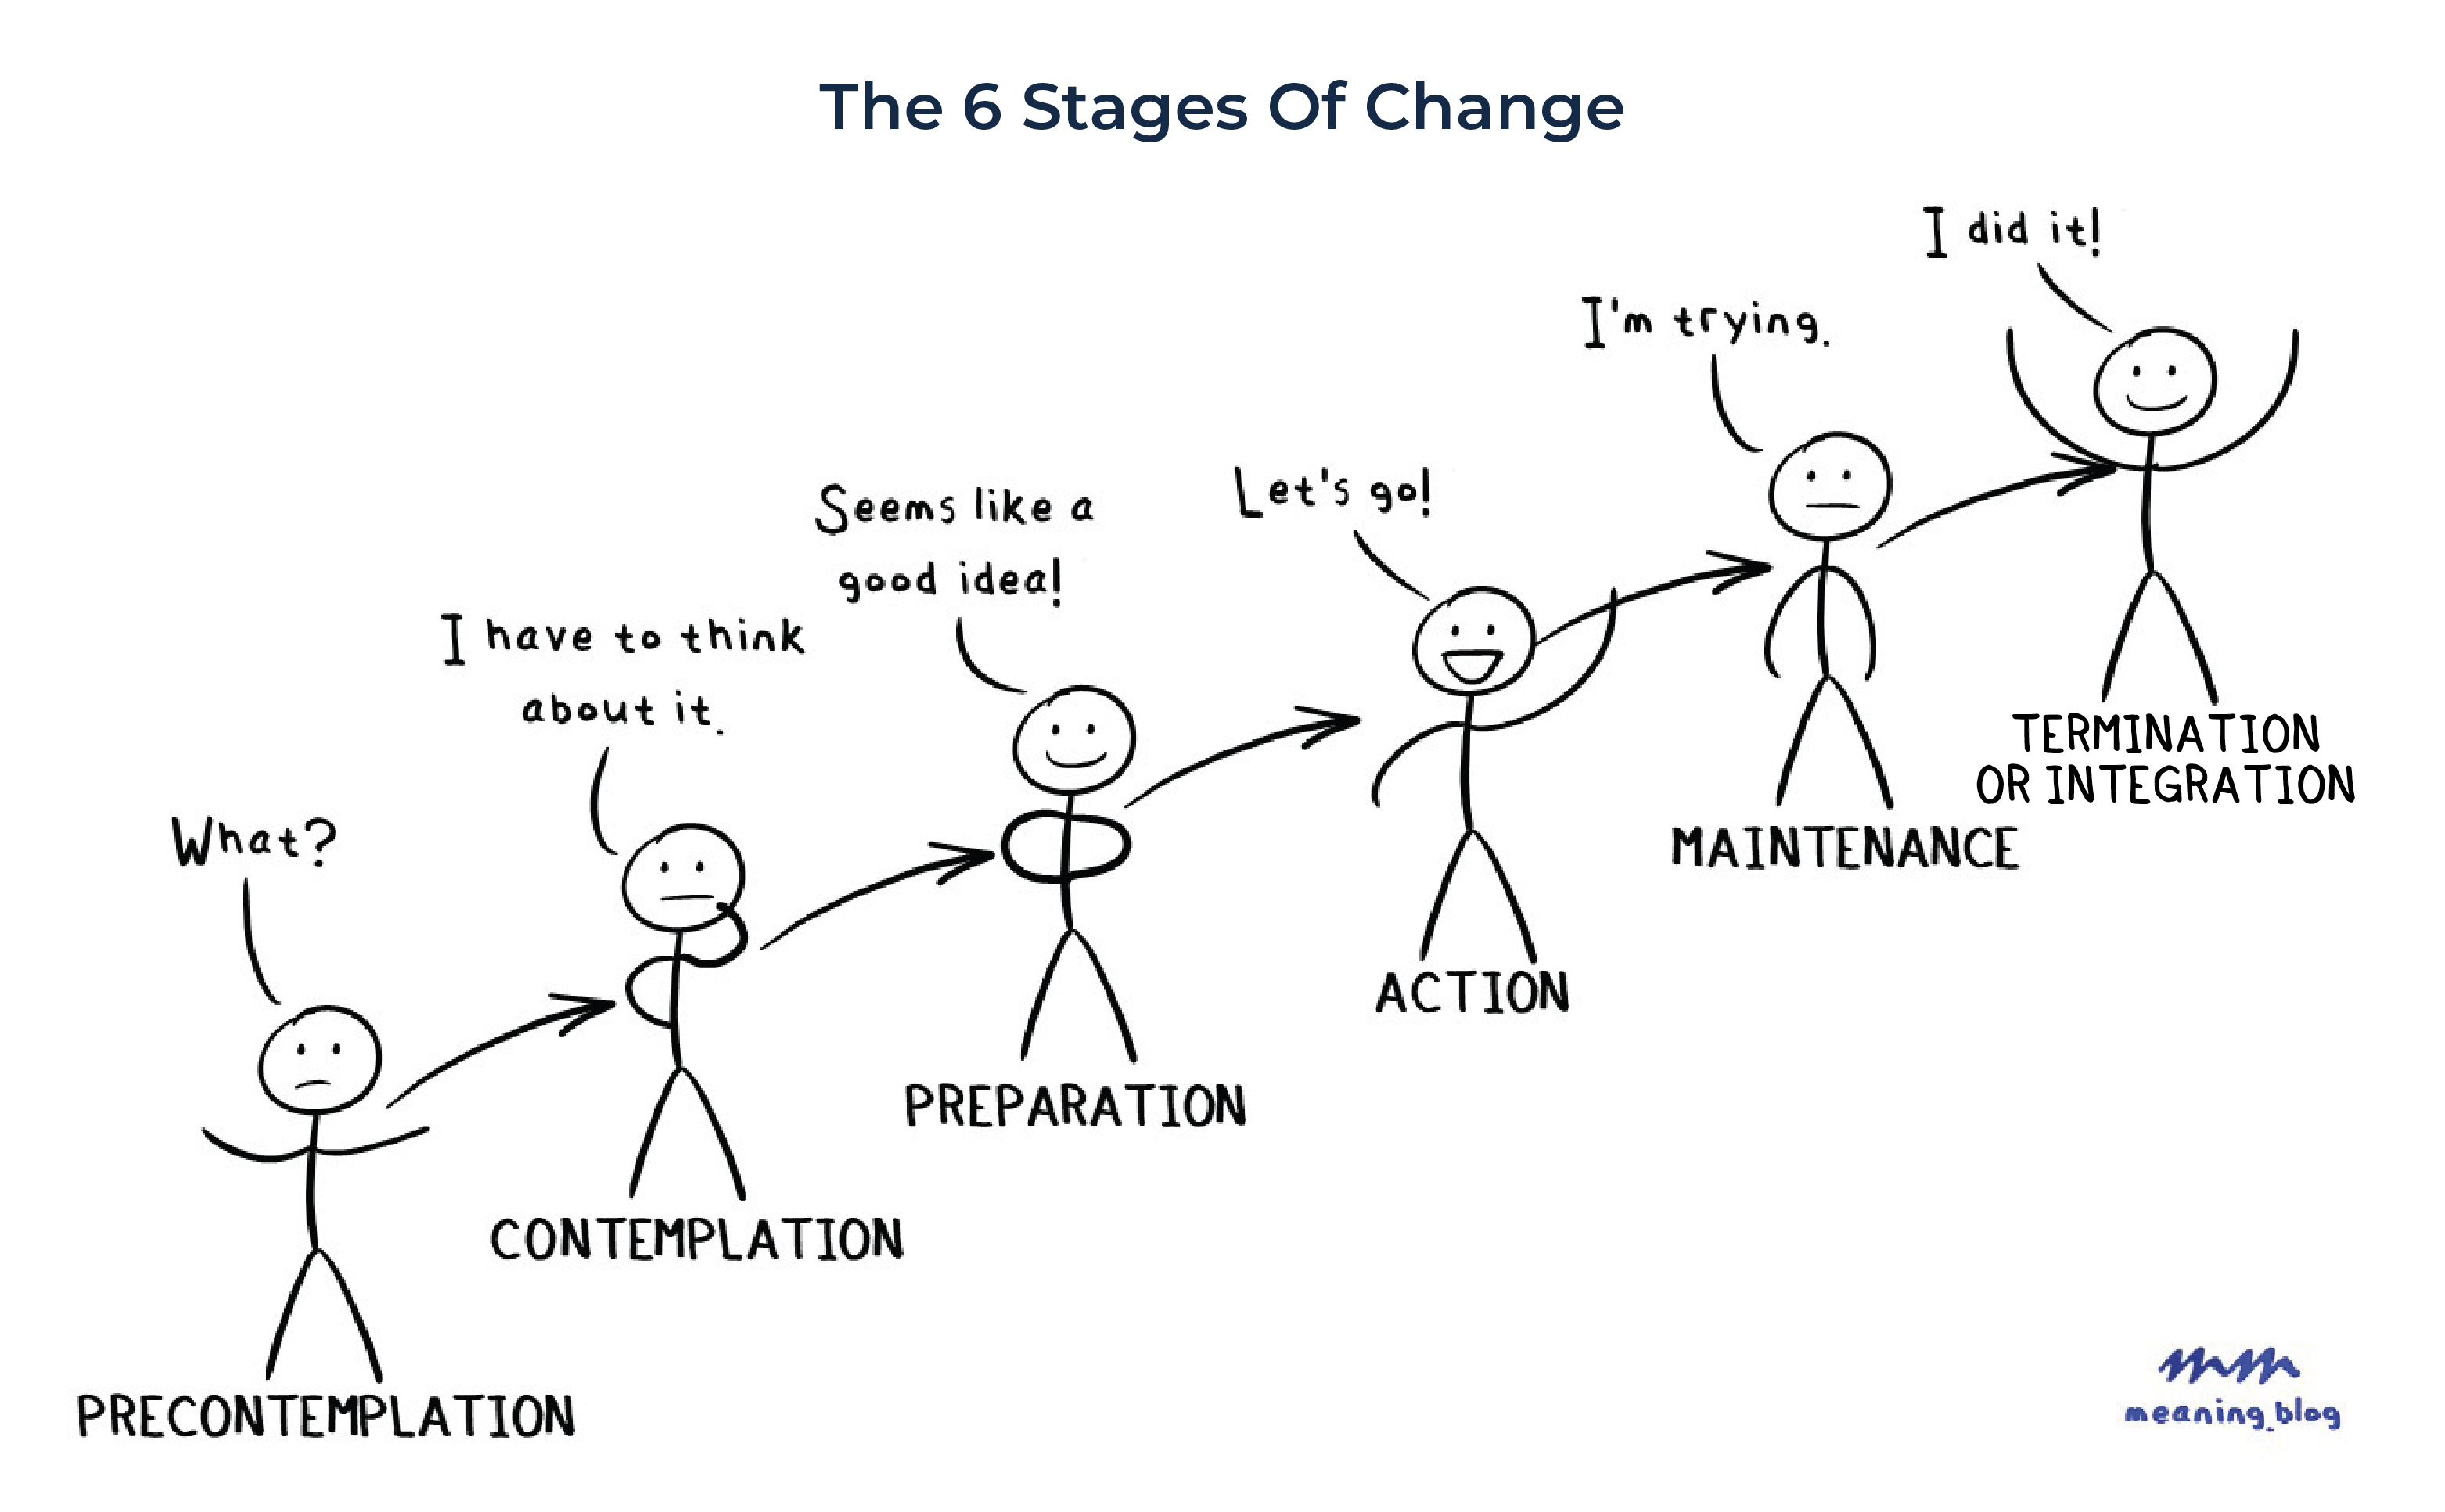 The Stages Of Change - Motivational Interviewing